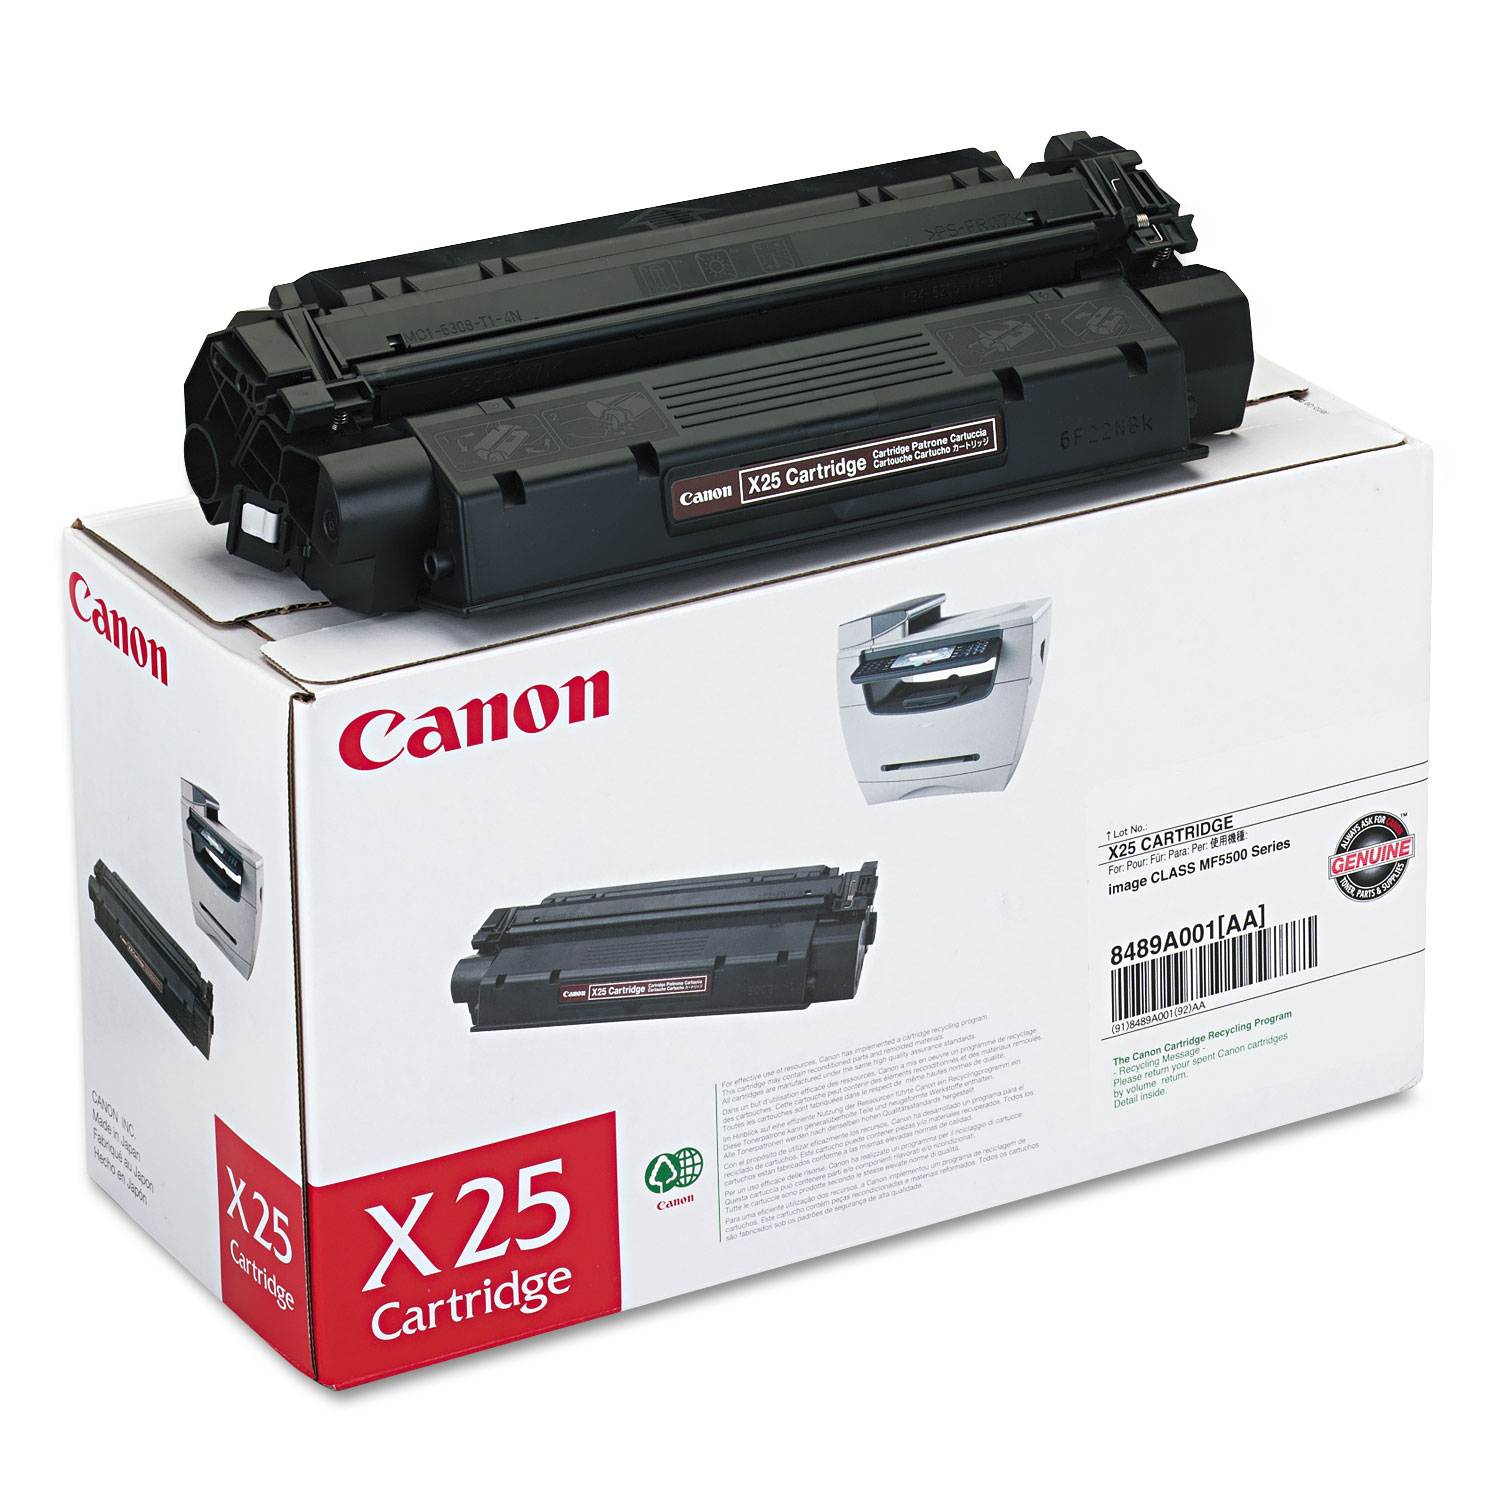  Canon 8489A001 X25 (X25) Toner, 2500 Page-Yield, Black (CNM8489A001) 